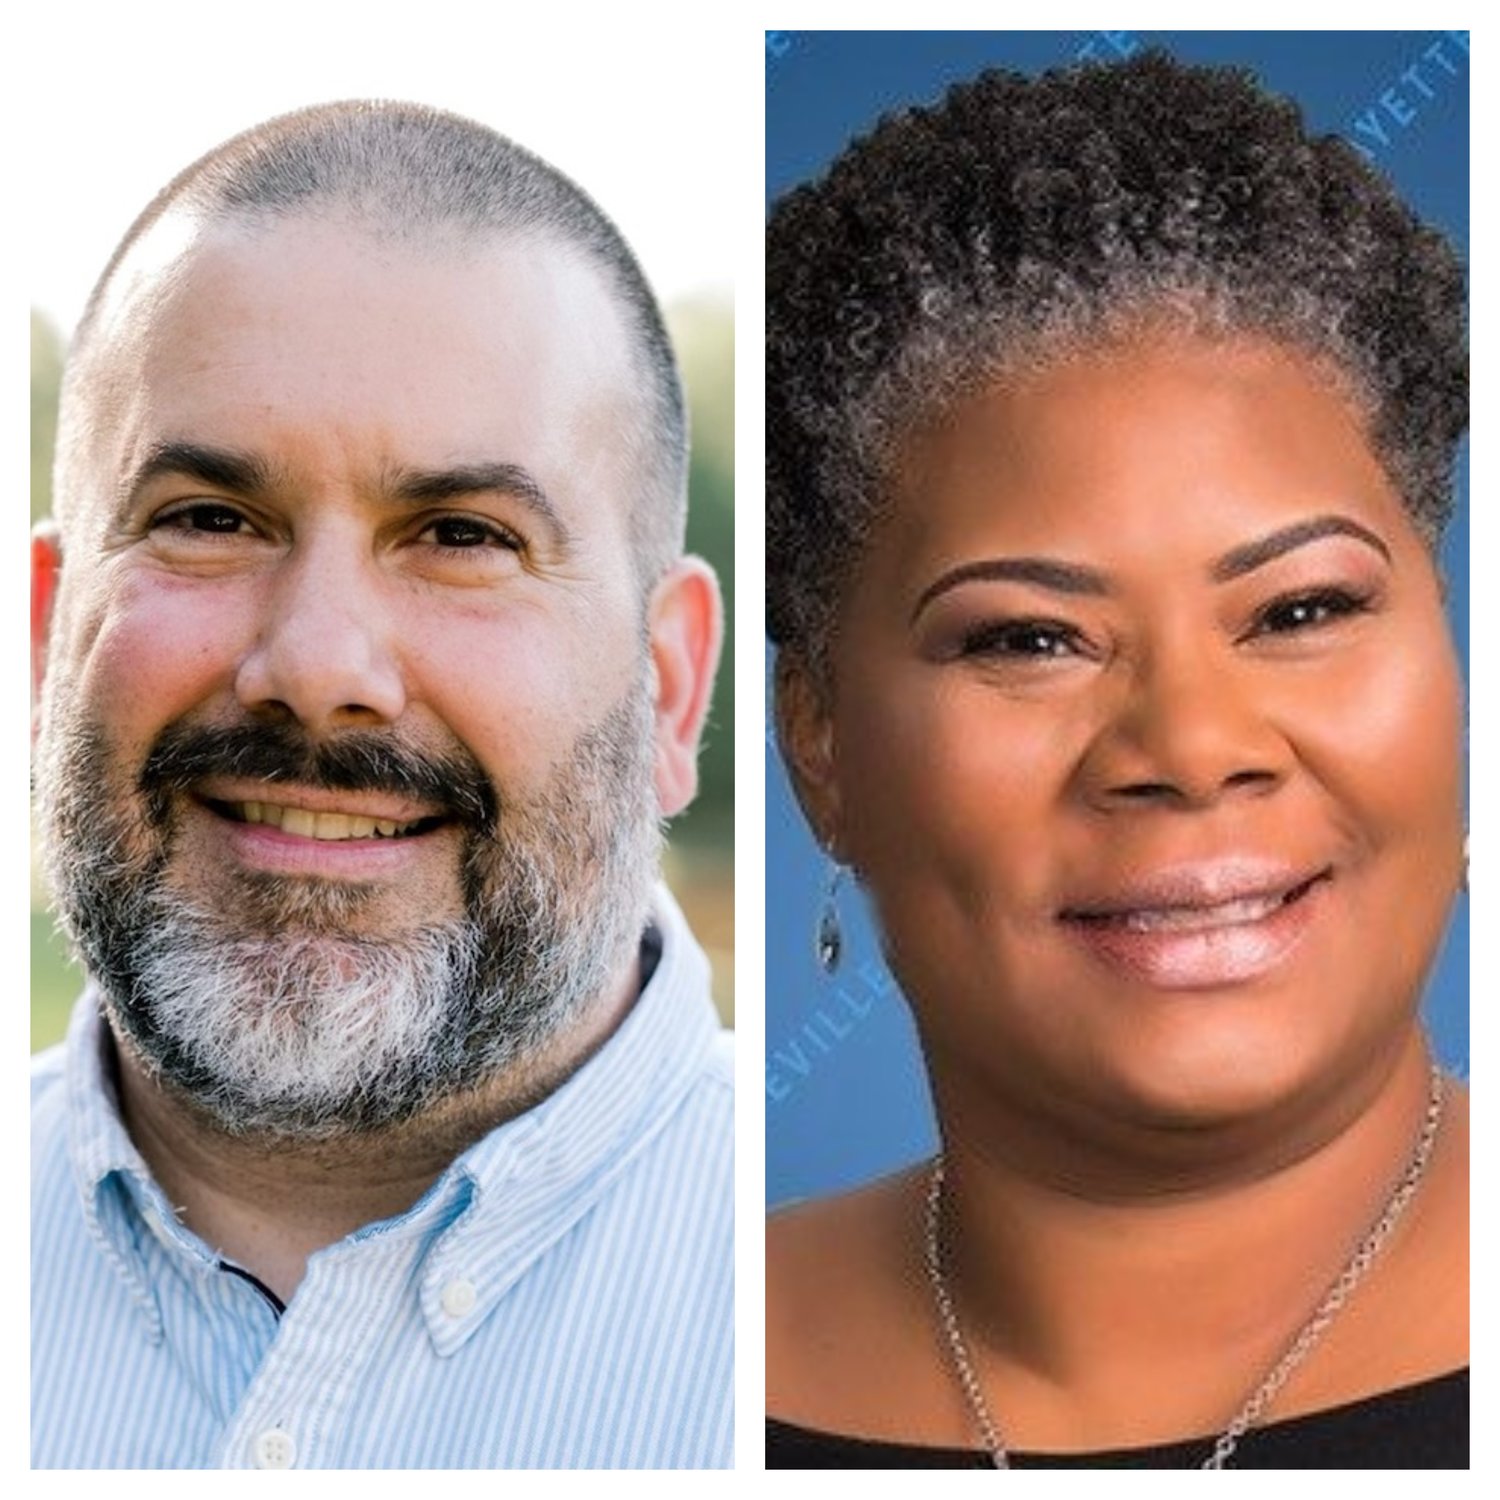 Deno Hondros and Yvonne Kinston are candidates for the Fayetteville City Council representing District 9 in the July 26 election.